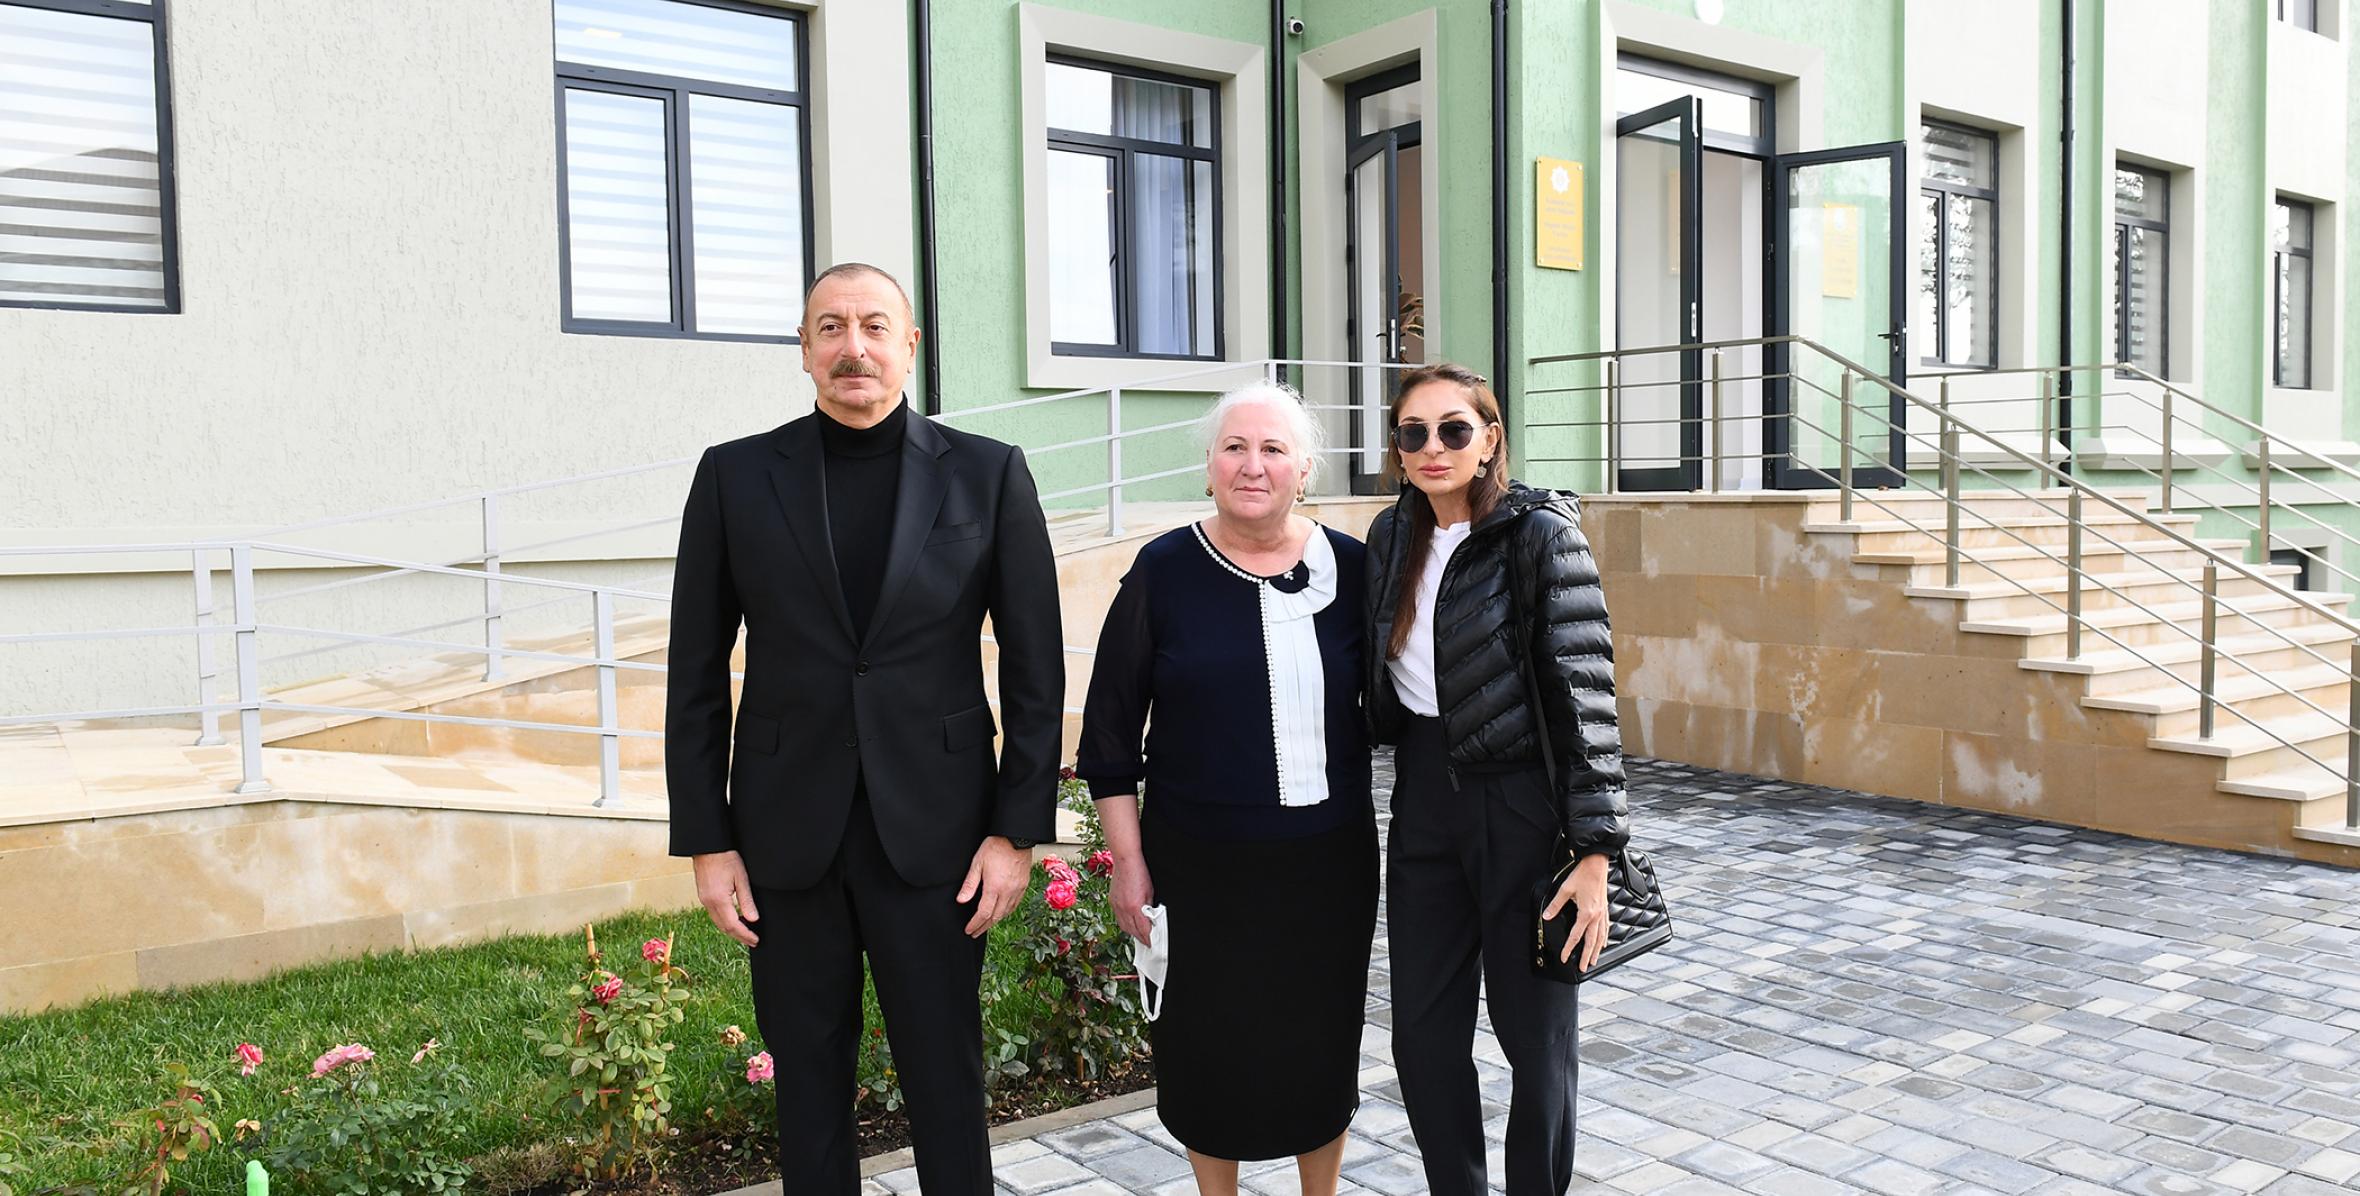 Ilham Aliyev and First Lady Mehriban Aliyeva attended the opening of foster care-kindergarten in Shamakhi city